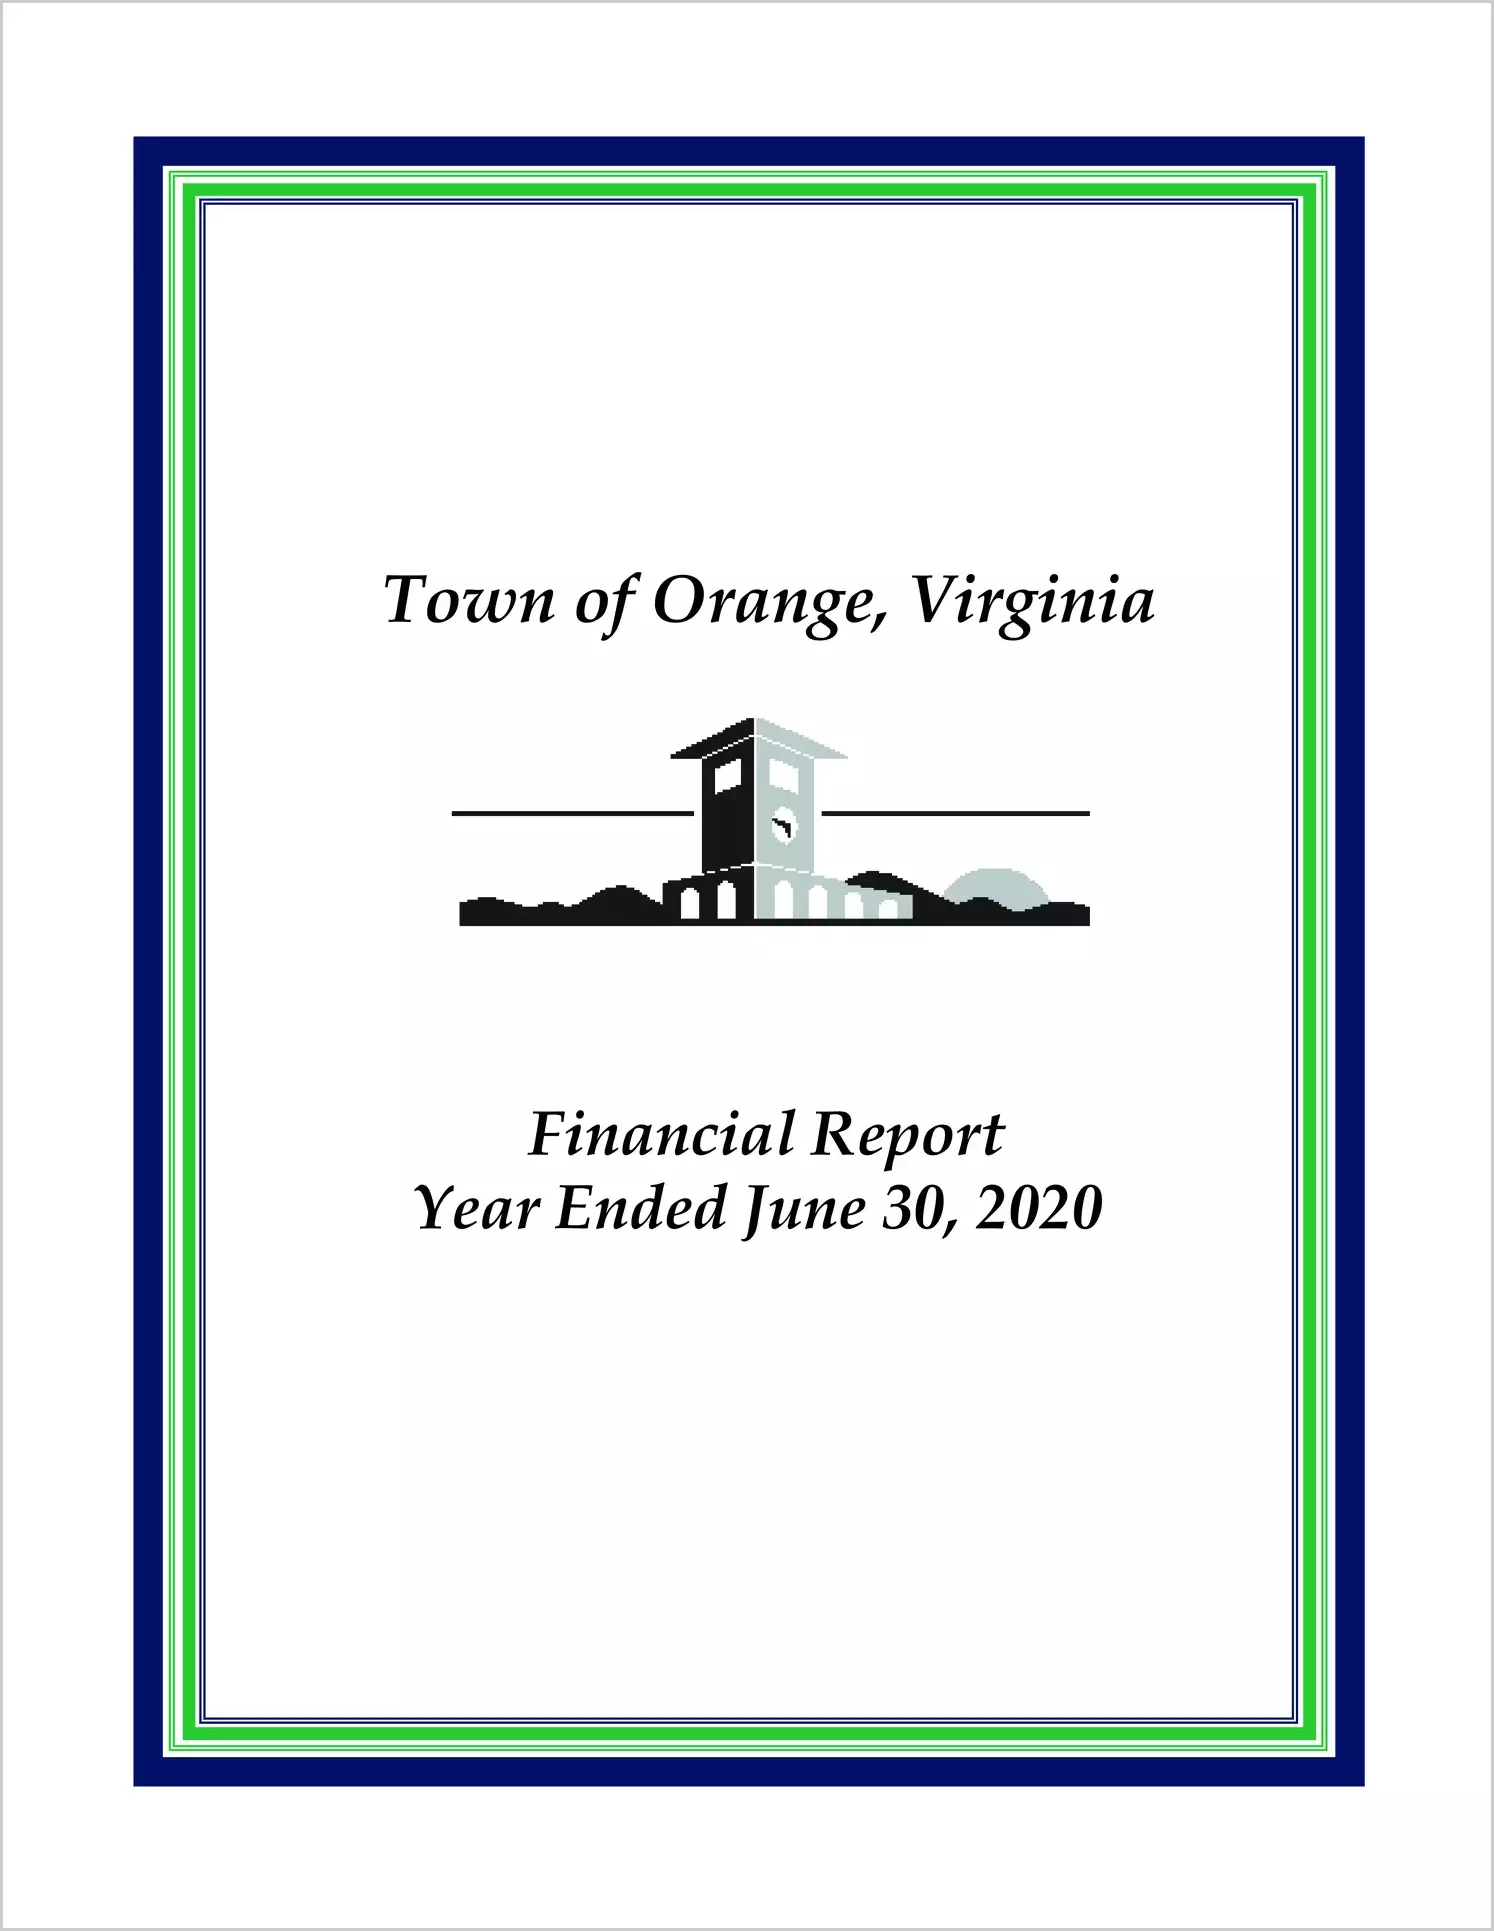 2020 Annual Financial Report for Town of Orange